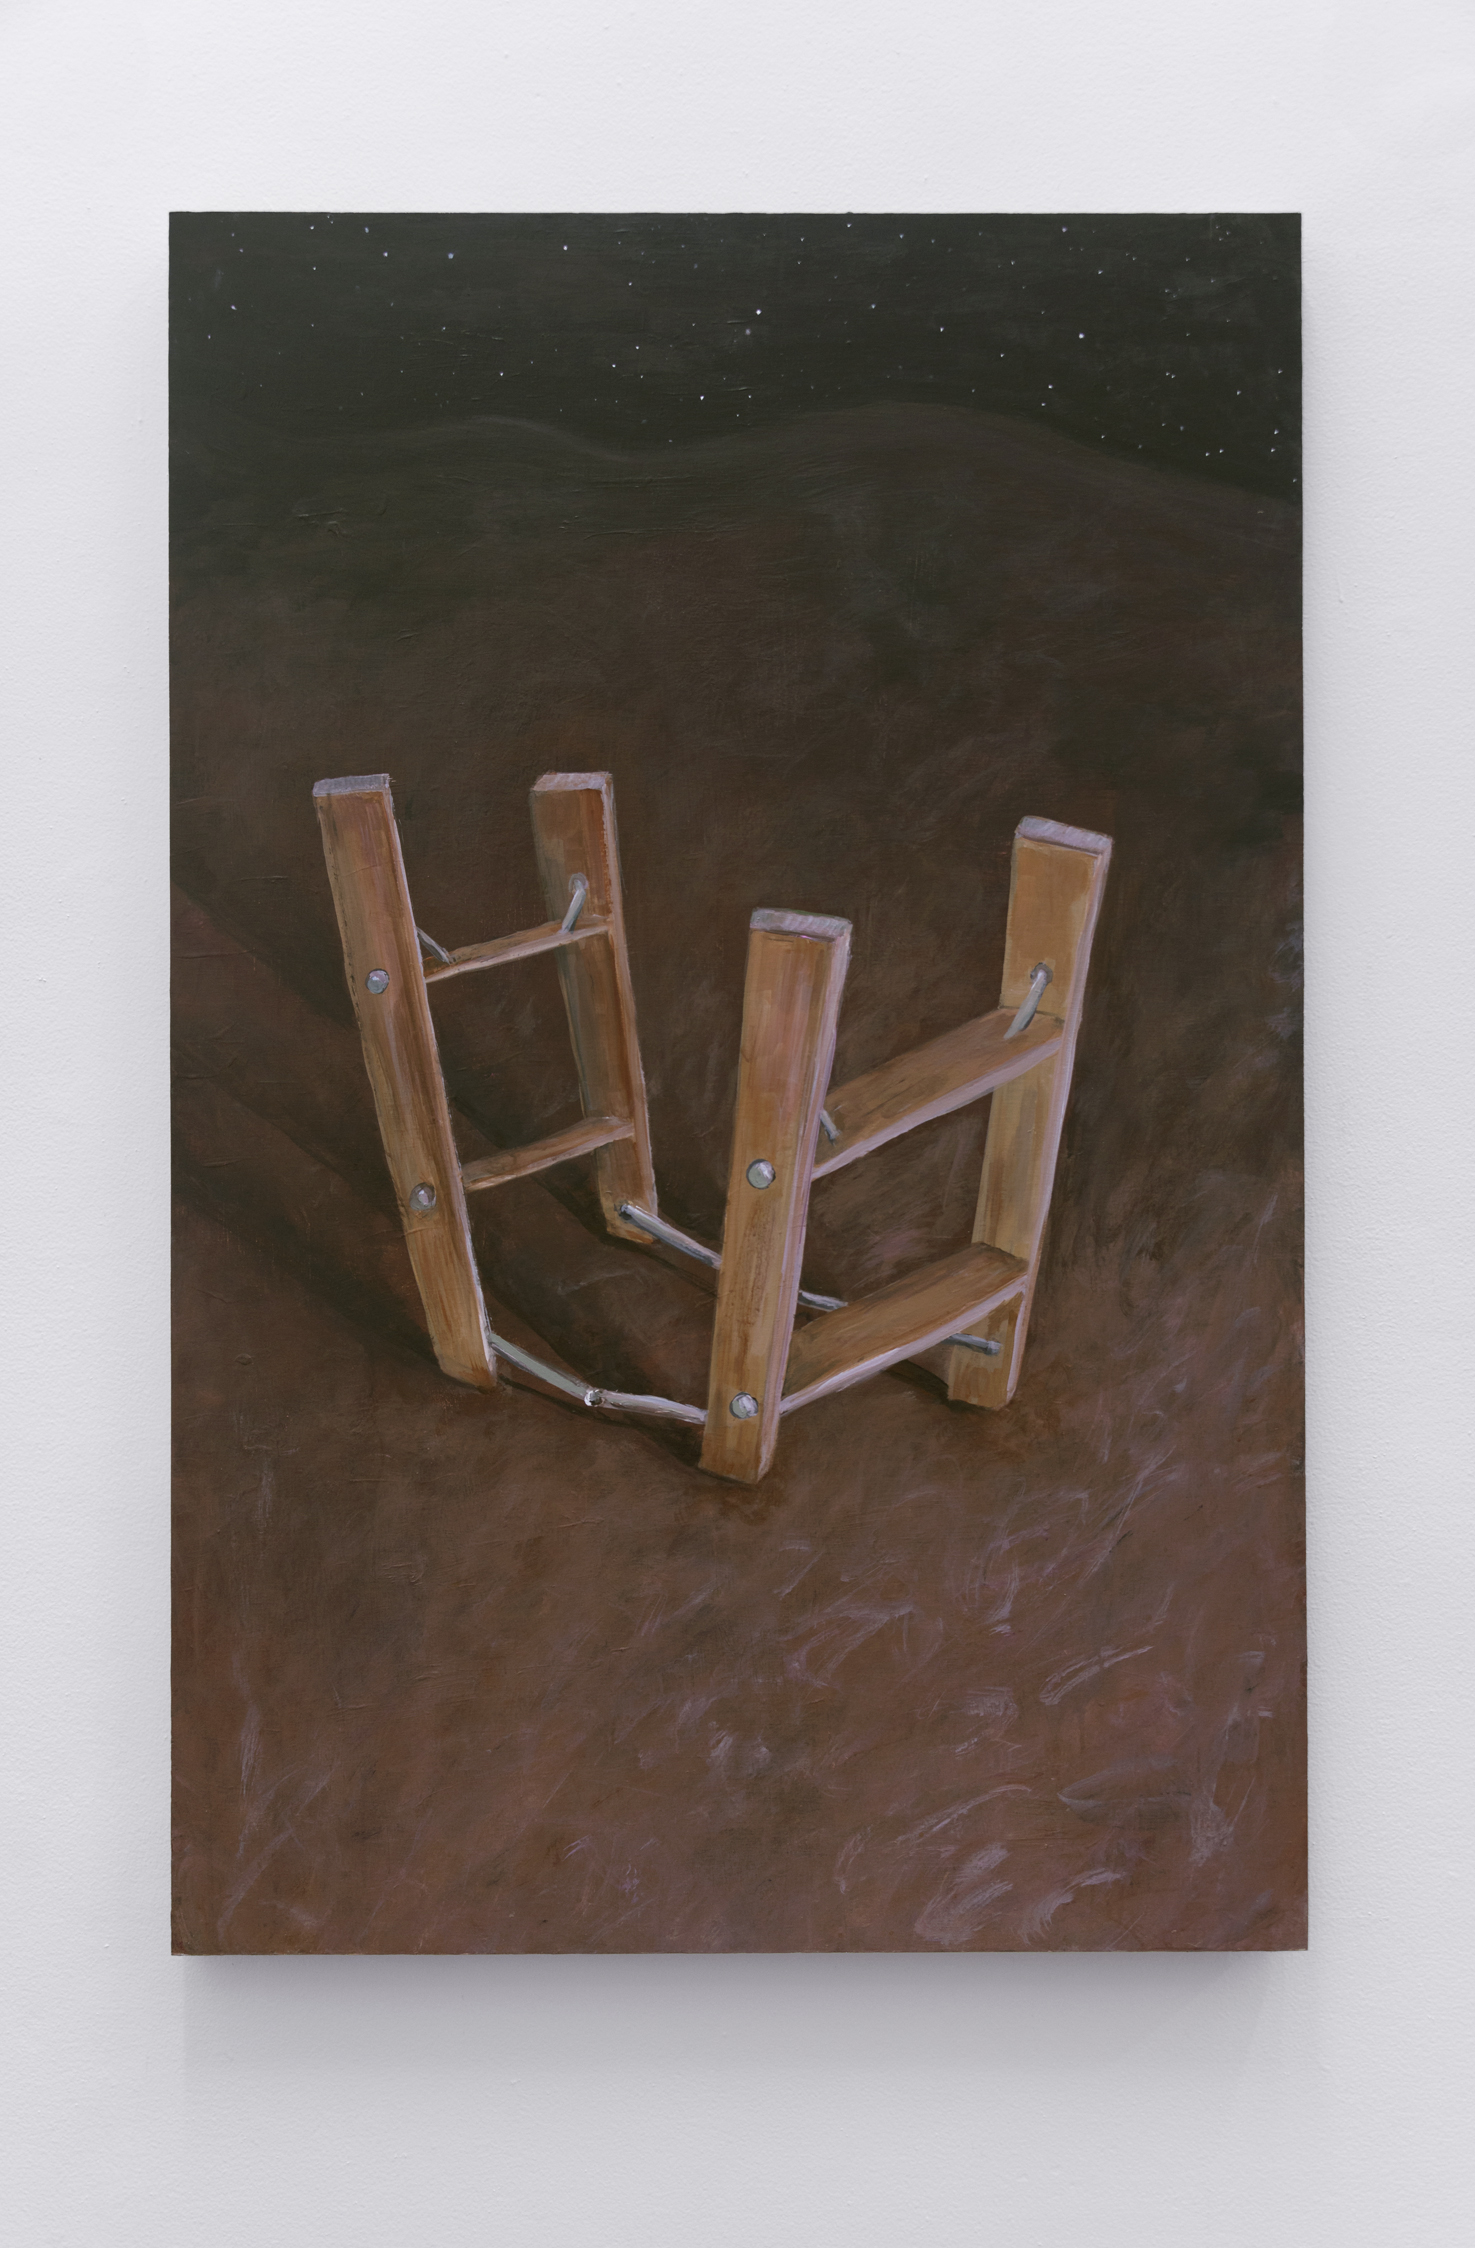   Ladder,  Acrylic and flashe on cradled birch panel 48 x 31.5 in, 2019 